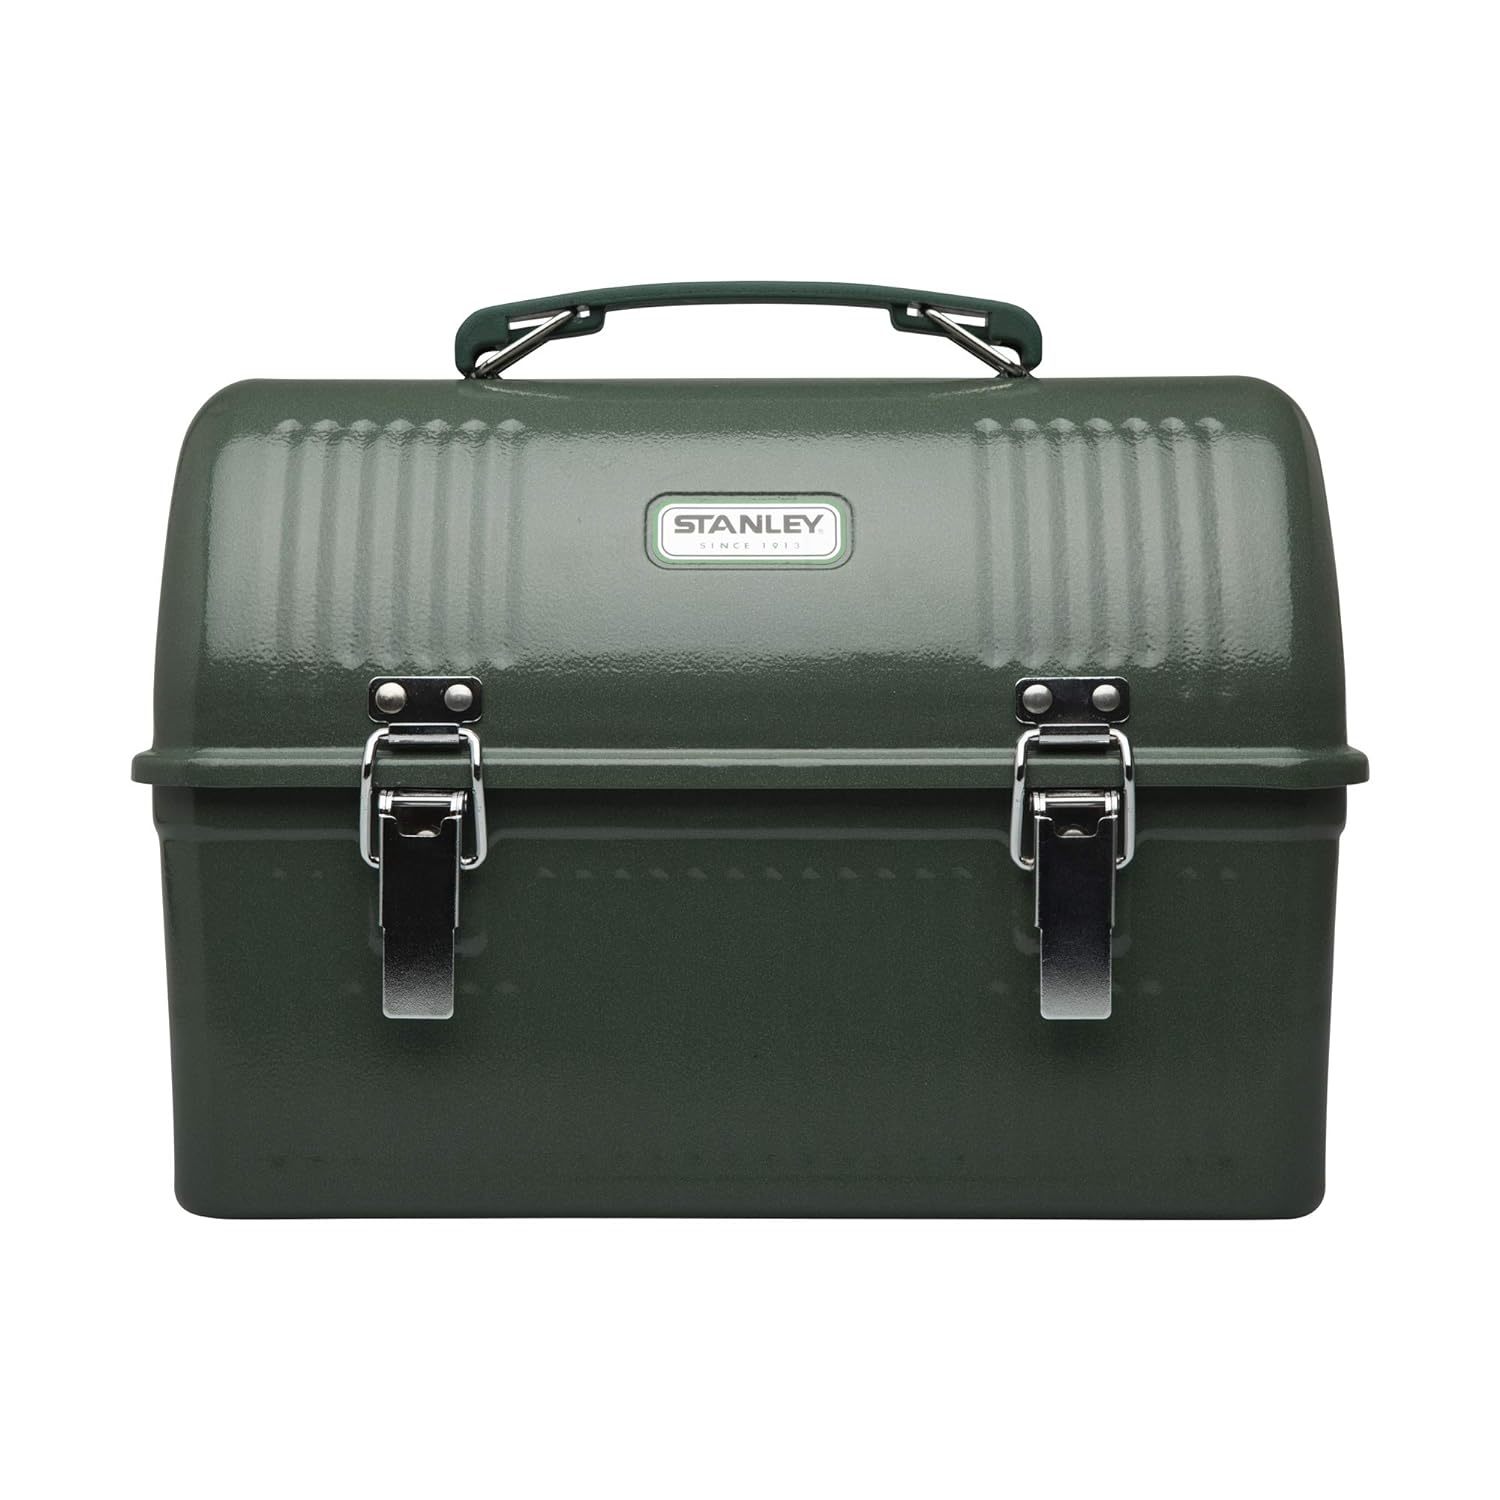 Stanley Classic 10qt Lunch Box  Large Lunchbox - Fits Meals, Containers, Thermos - $93.99